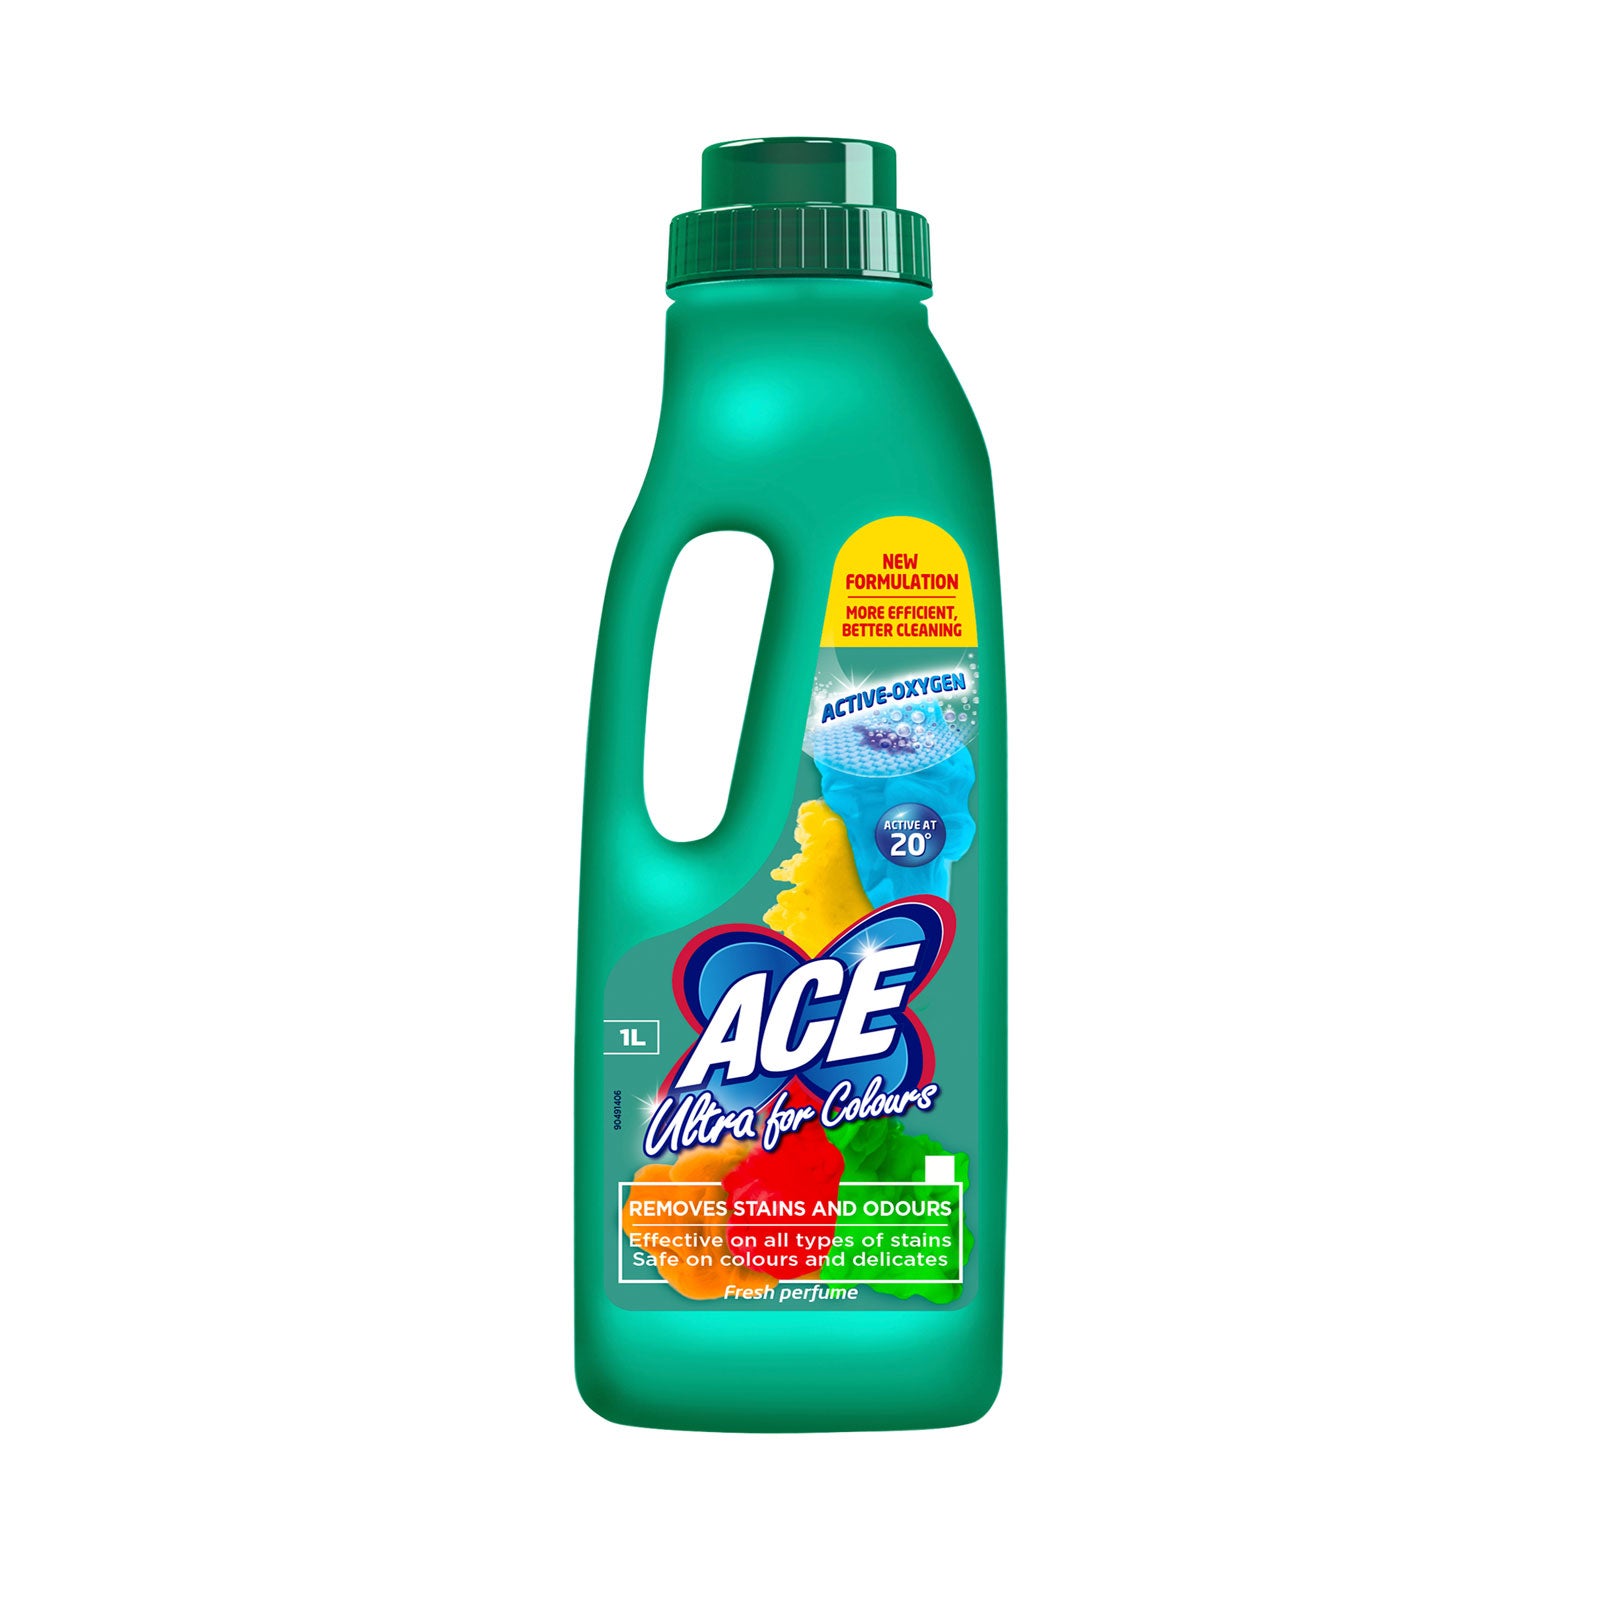 Ace Ultra for Colours Fresh Perfume 1L